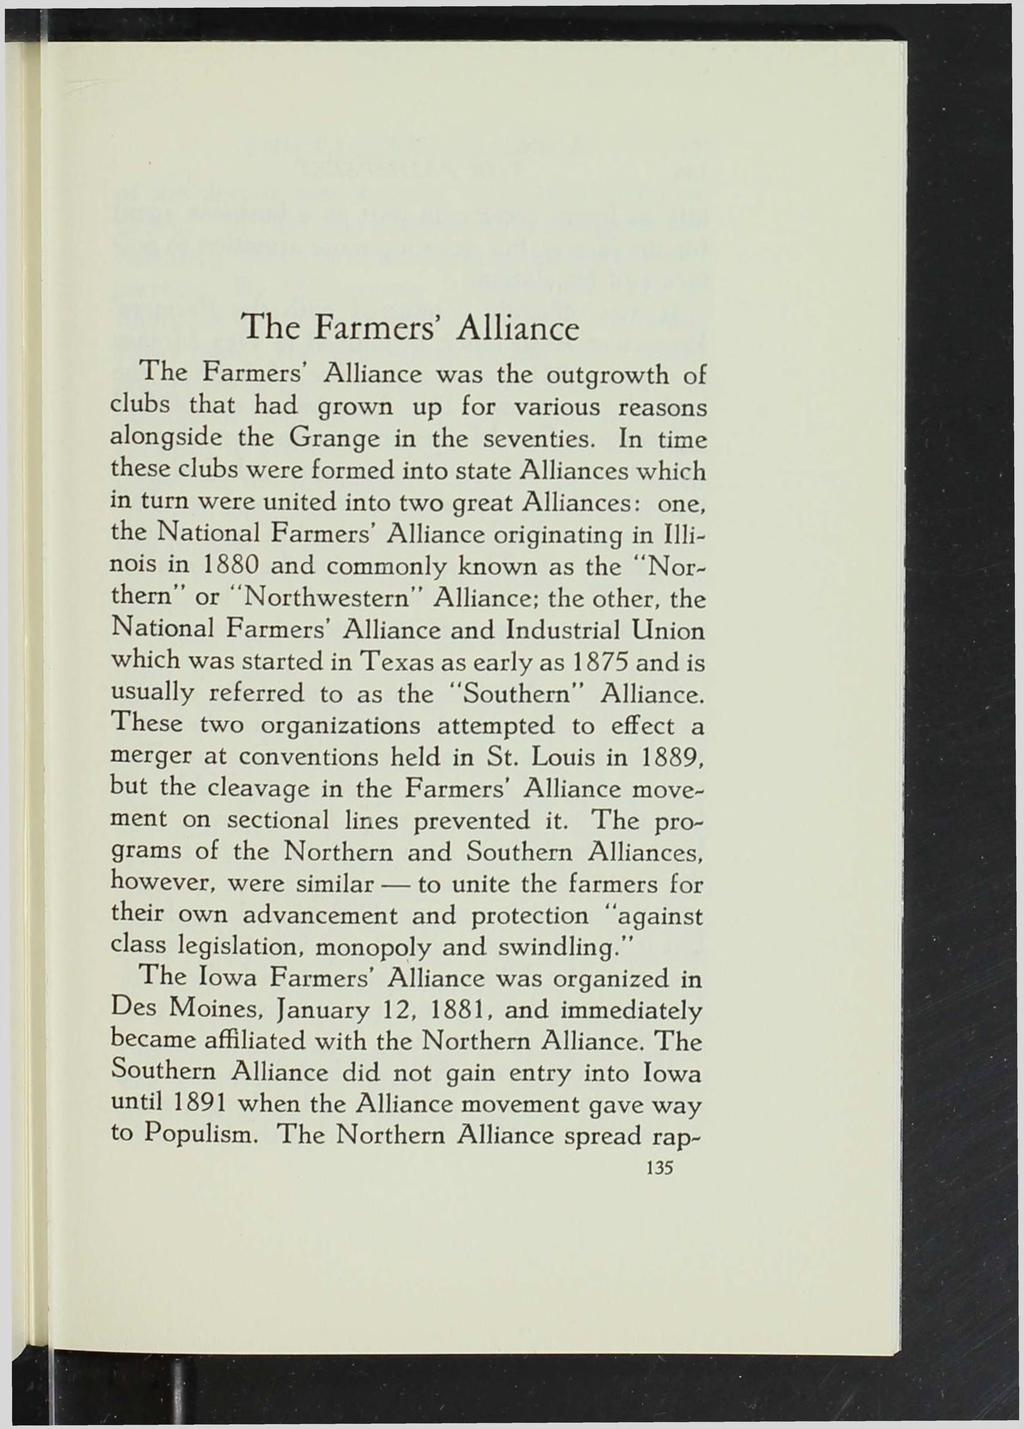 The Farmers Alliance The Farmers Alliance was the outgrowth of clubs that had grown up for various reasons alongside the Grange in the seventies.